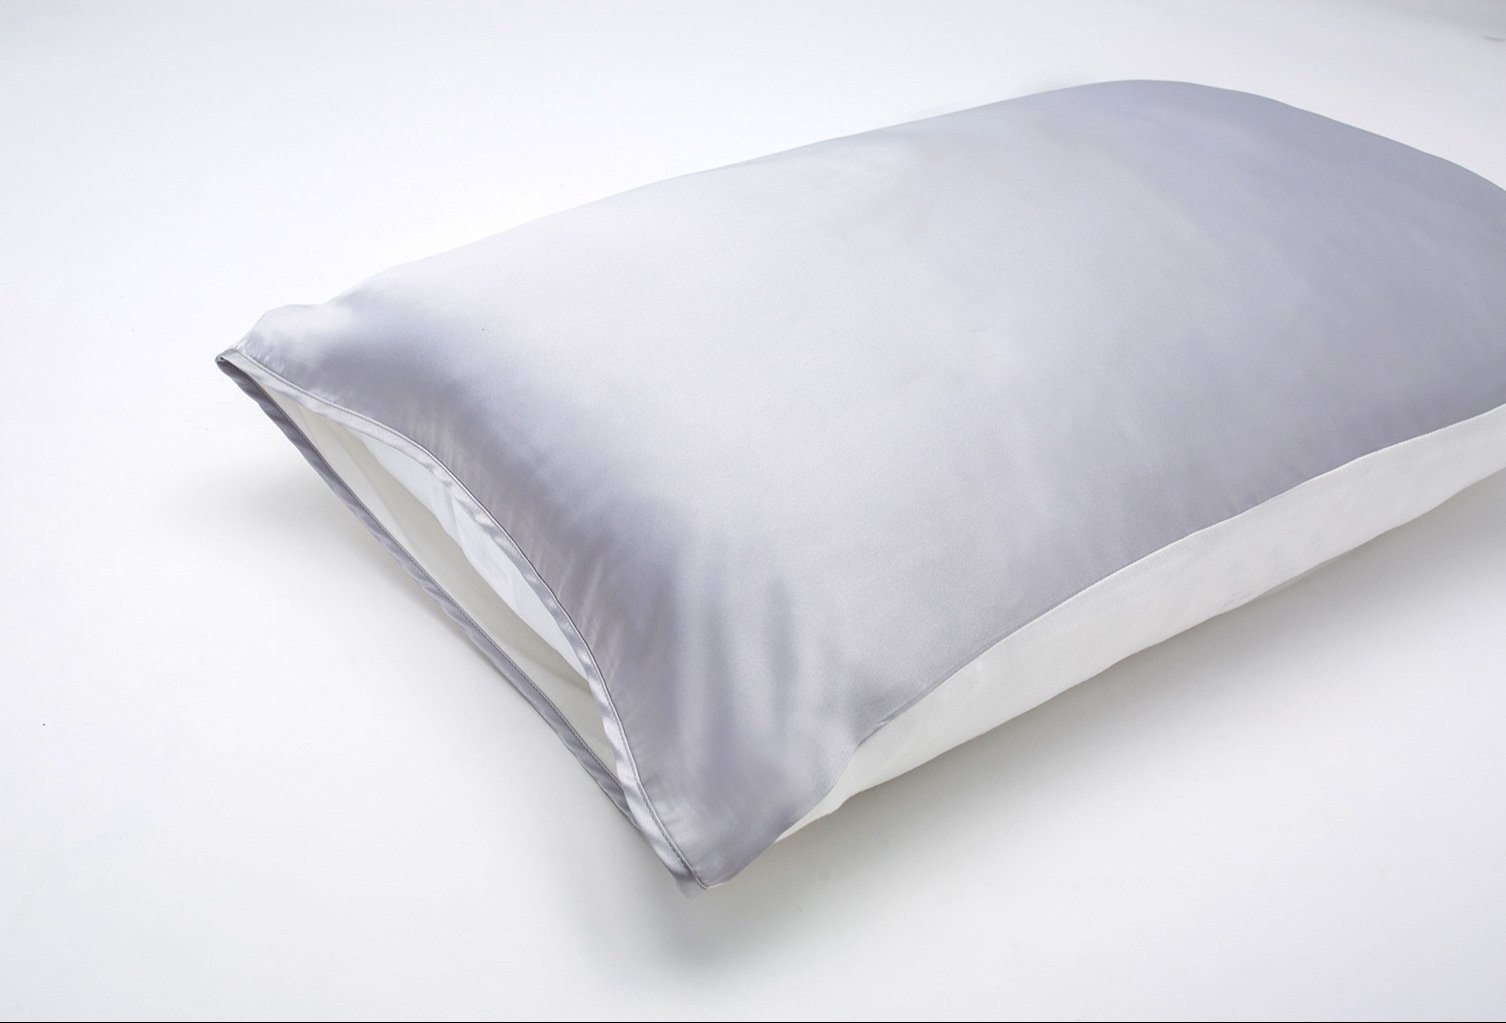 Silked Satin Pillowcase Pillow Sleeve Grey for skin and hair in partnership with Fab Fit Fun Box Female Black Owned Made in USA